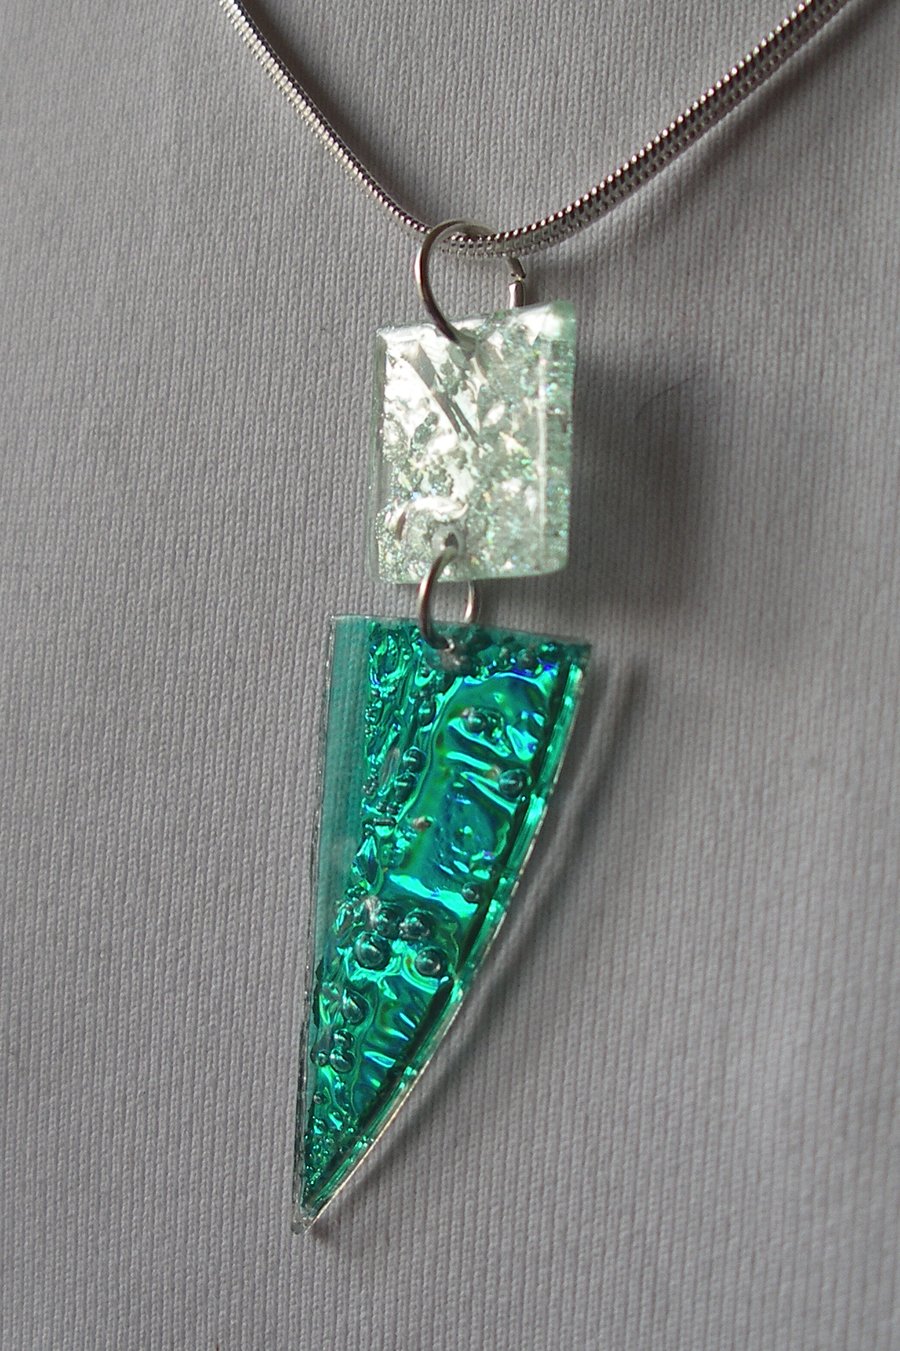 Metallic turquoise and pale green pendant.